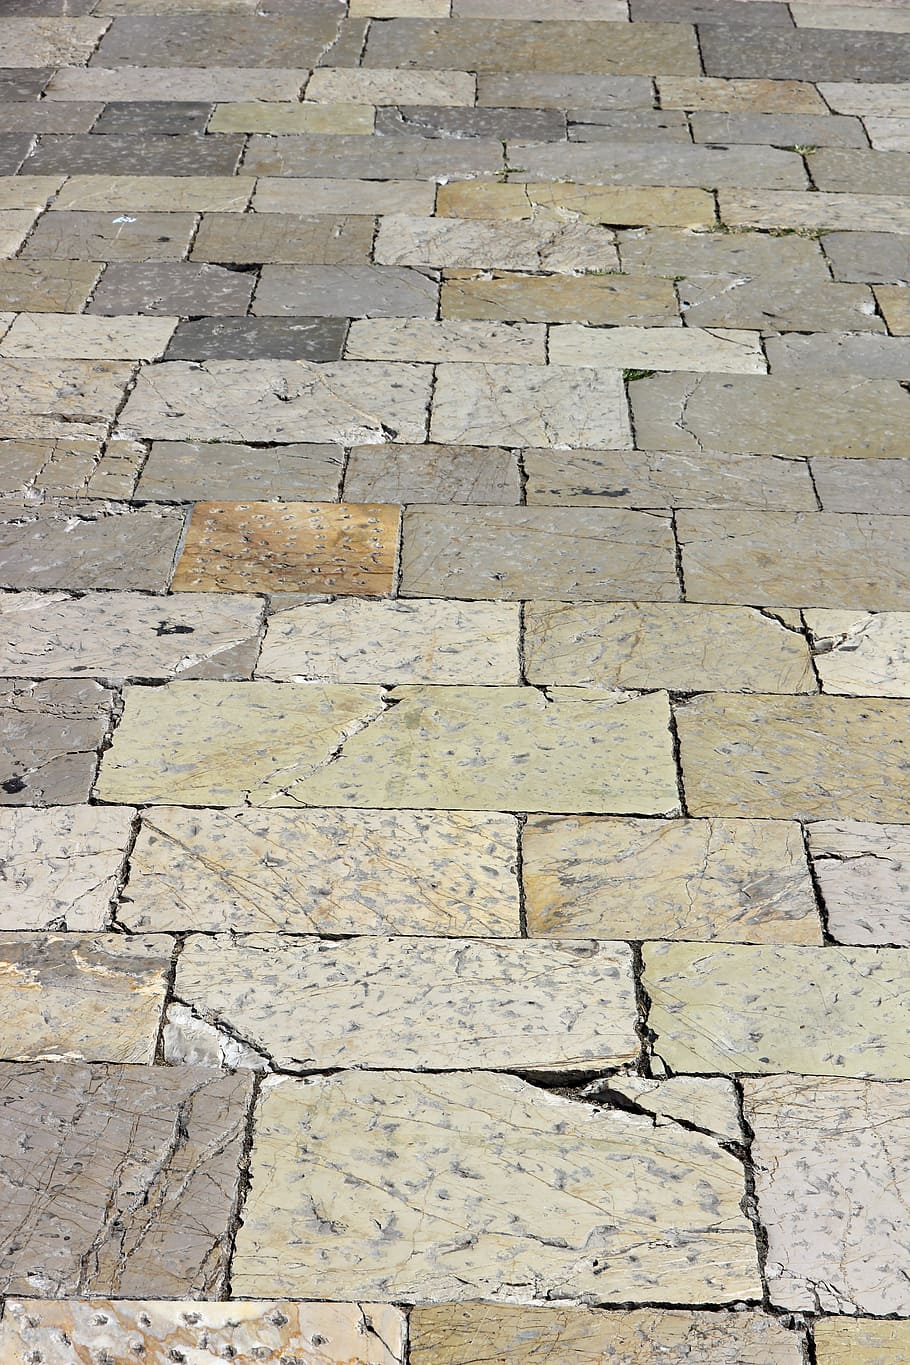 Patch, Paving Stones, Flooring, Away, stones, sidewalk, full frame, textured, backgrounds, pattern